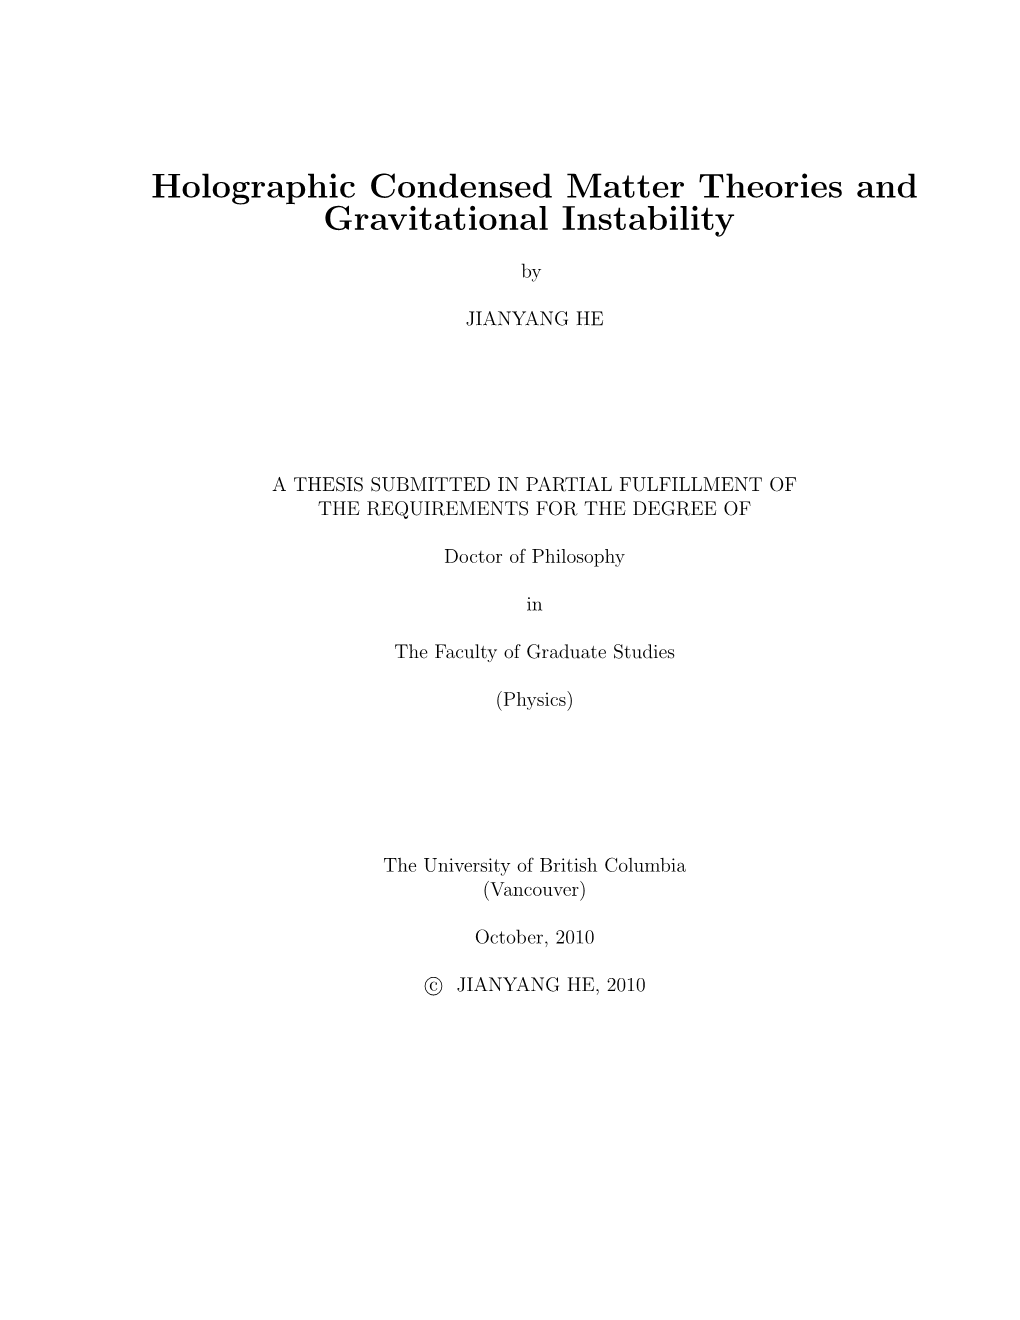 Holographic Condensed Matter Theories and Gravitational Instability